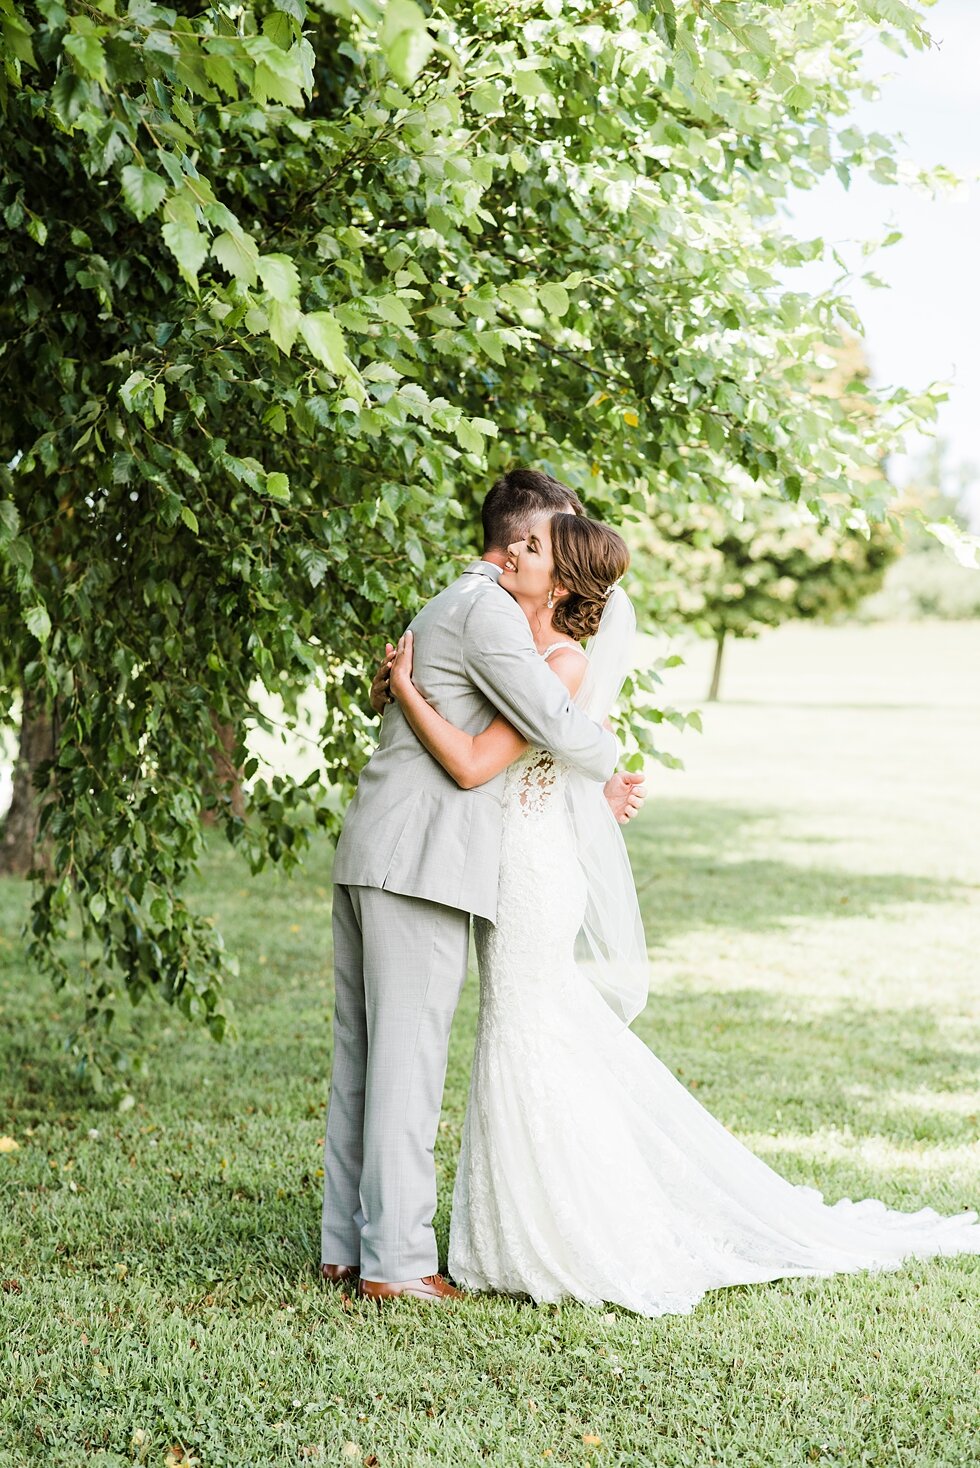  Bride and groom hug after first look at hubers winery in an emotional reunion that will be the beginning of their journey together on their wedding day. #thatsdarling #weddingday #weddinginspiration #weddingphoto #love #justmarried #midwestphotograp